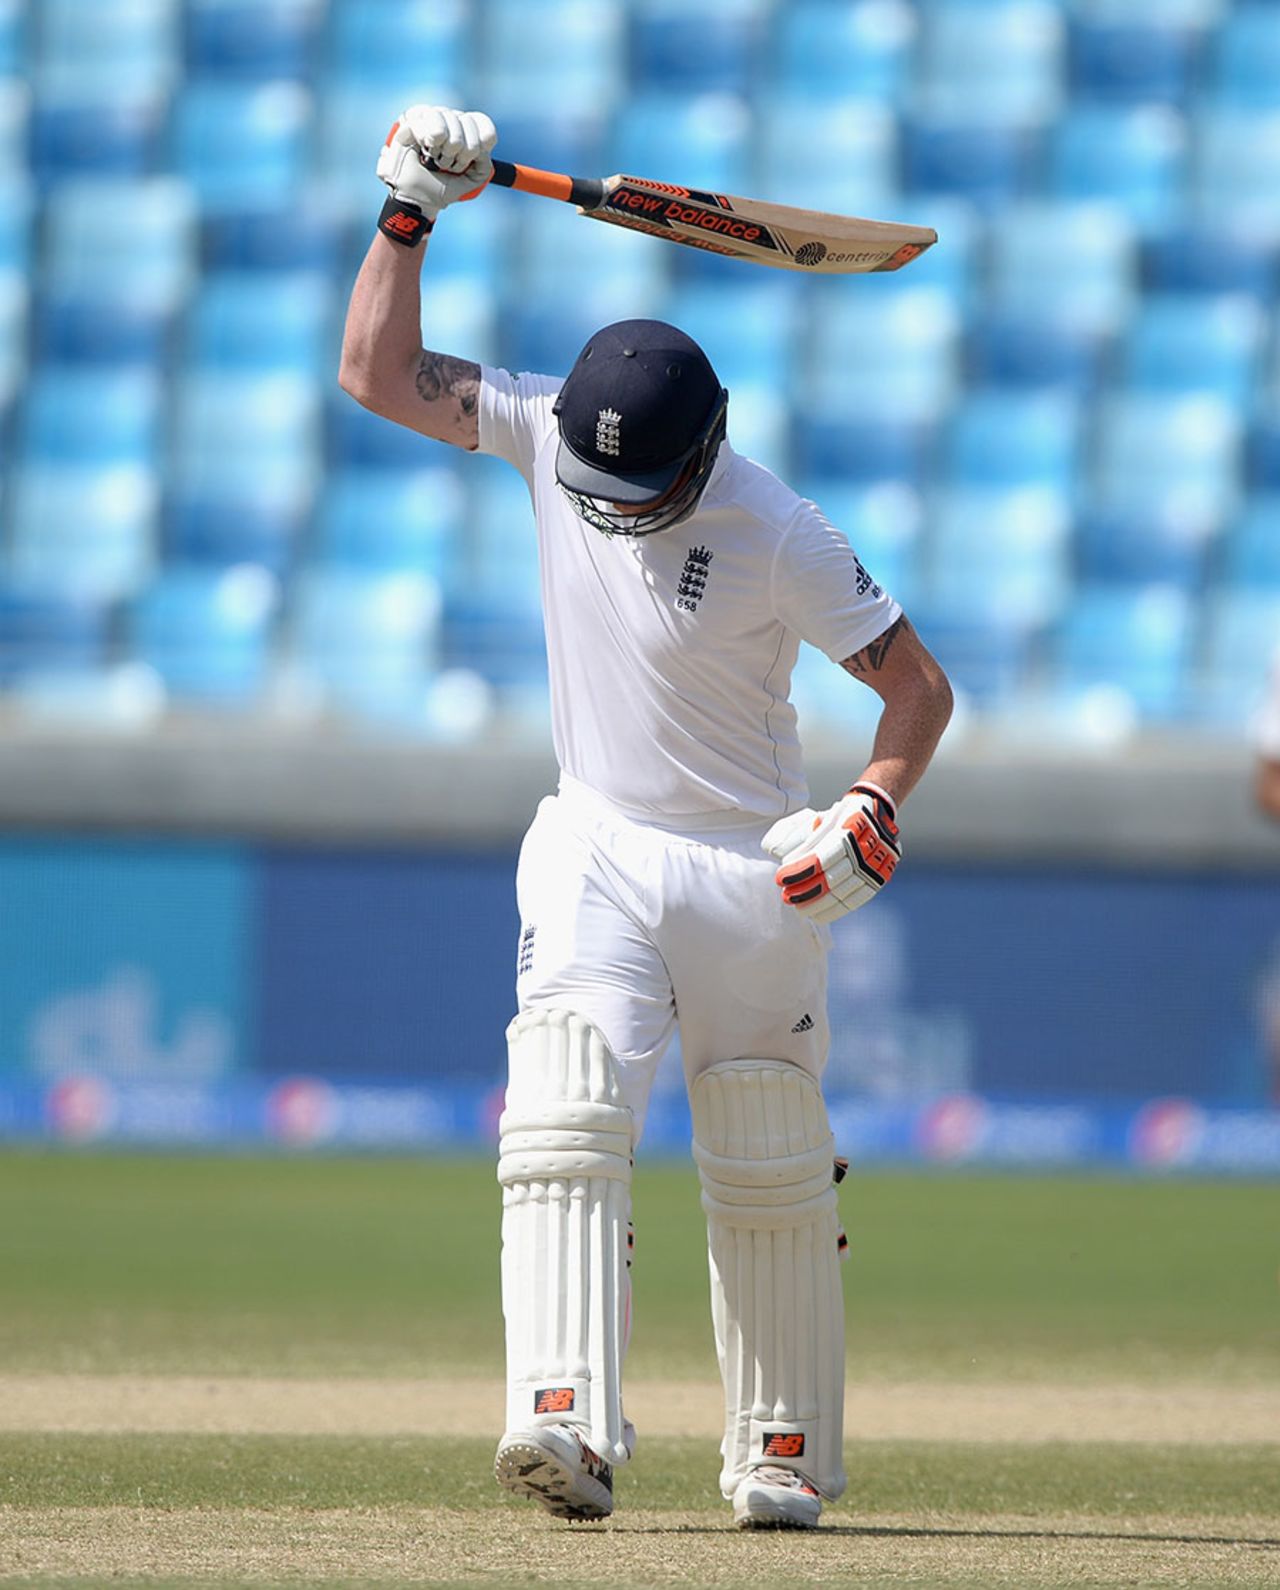 After seeing off the spinners, Ben Stokes was livid at falling to the new ball, Pakistan v England, 2nd Test, Dubai, 5th day, October 26, 2015